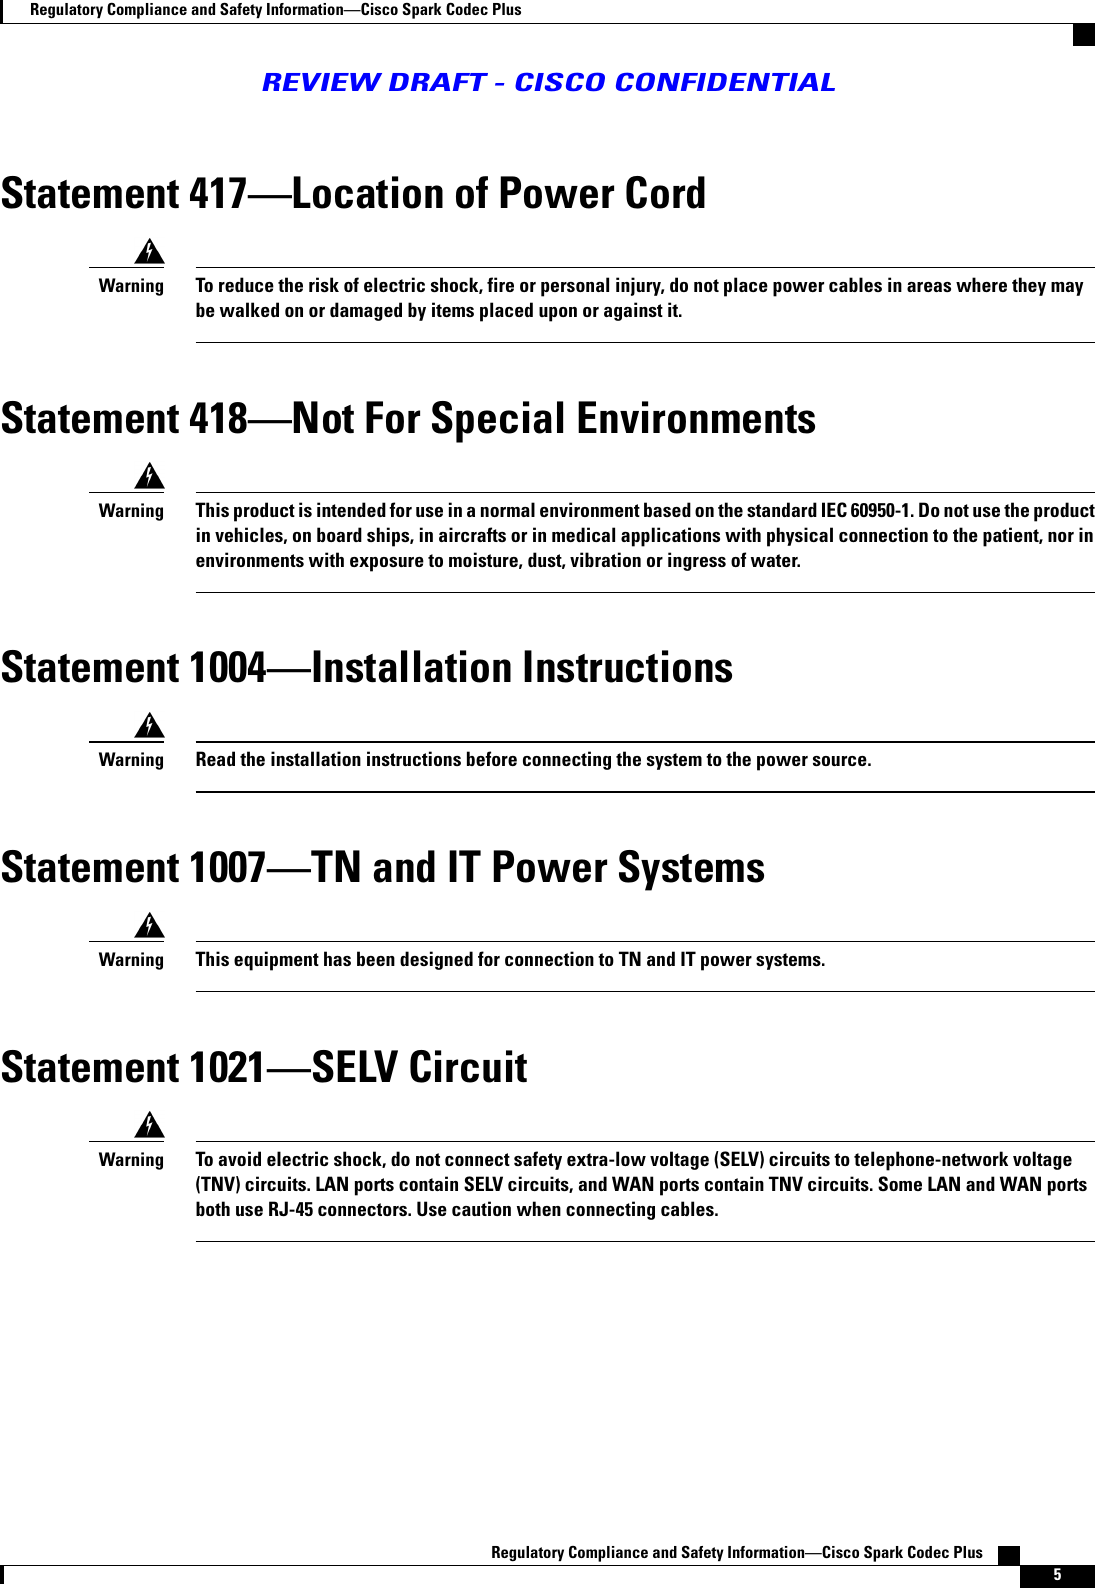 Statement 417Location of Power CordTo reduce the risk of electric shock, fire or personal injury, do not place power cables in areas where they maybe walked on or damaged by items placed upon or against it.WarningStatement 418Not For Special EnvironmentsThis product is intended for use in a normal environment based on the standard IEC 60950-1. Do not use the productin vehicles, on board ships, in aircrafts or in medical applications with physical connection to the patient, nor inenvironments with exposure to moisture, dust, vibration or ingress of water.WarningStatement 1004Installation InstructionsRead the installation instructions before connecting the system to the power source.WarningStatement 1007TN and IT Power SystemsThis equipment has been designed for connection to TN and IT power systems.WarningStatement 1021SELV CircuitTo avoid electric shock, do not connect safety extra-low voltage (SELV) circuits to telephone-network voltage(TNV) circuits. LAN ports contain SELV circuits, and WAN ports contain TNV circuits. Some LAN and WAN portsboth use RJ-45 connectors. Use caution when connecting cables.WarningRegulatory Compliance and Safety InformationCisco Spark Codec Plus    5Regulatory Compliance and Safety InformationCisco Spark Codec PlusREVIEW DRAFT - CISCO CONFIDENTIAL